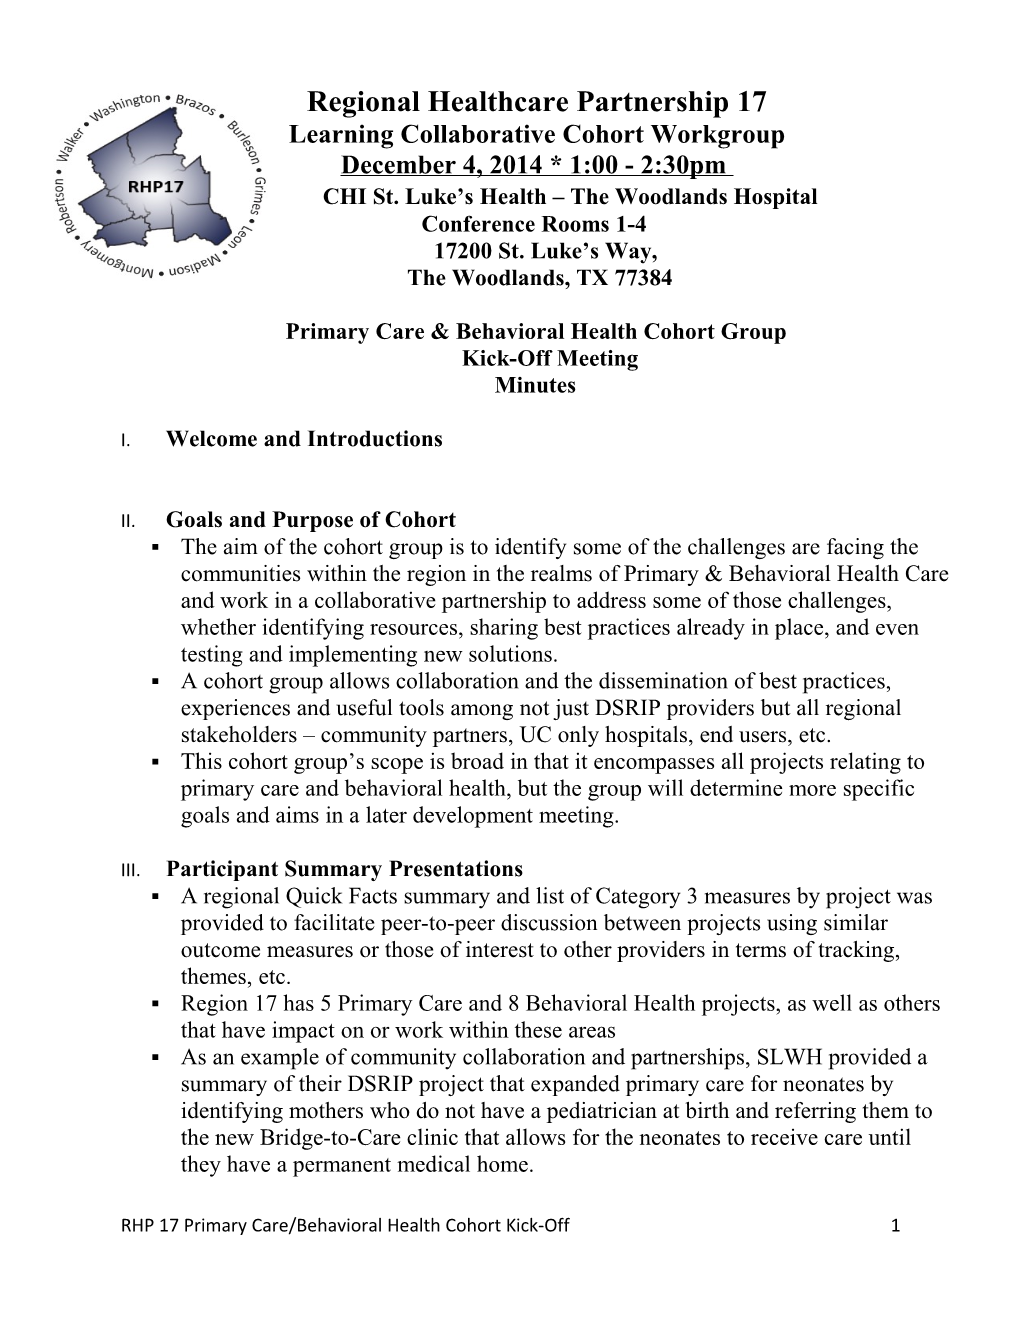 Primary Care & Behavioral Health Cohort Group